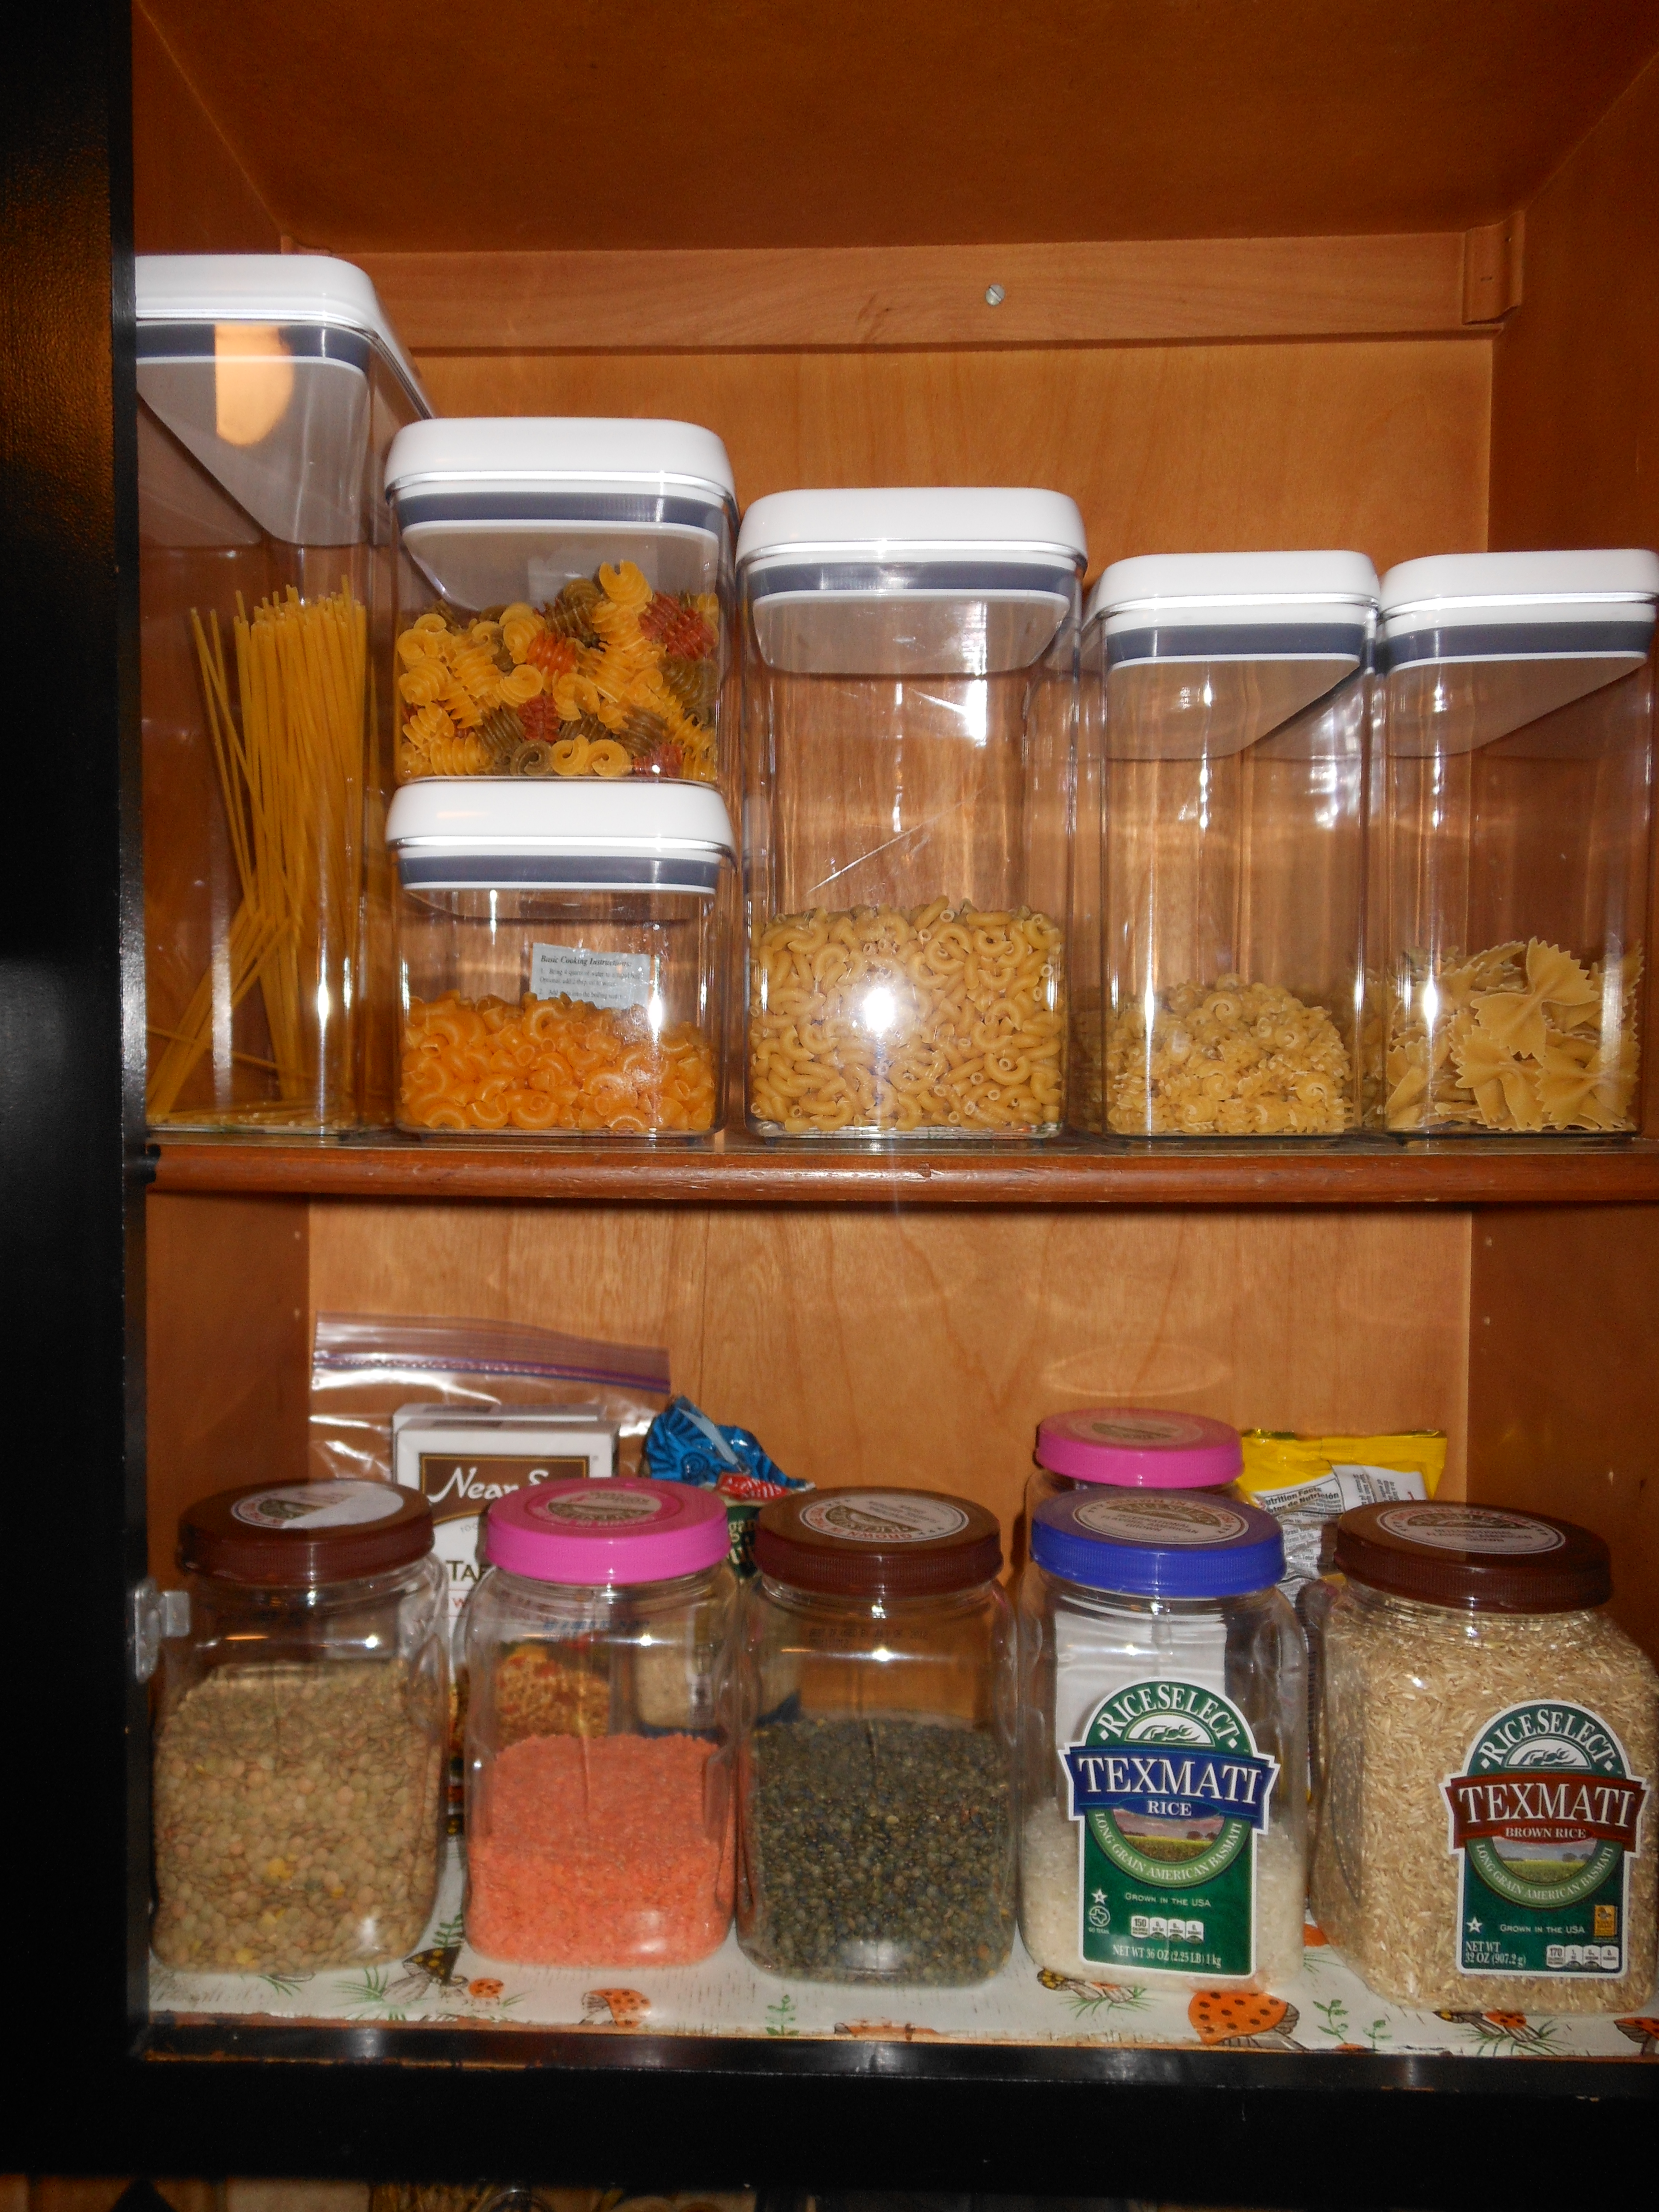 AFTER Photo of pasta/grain cabinet